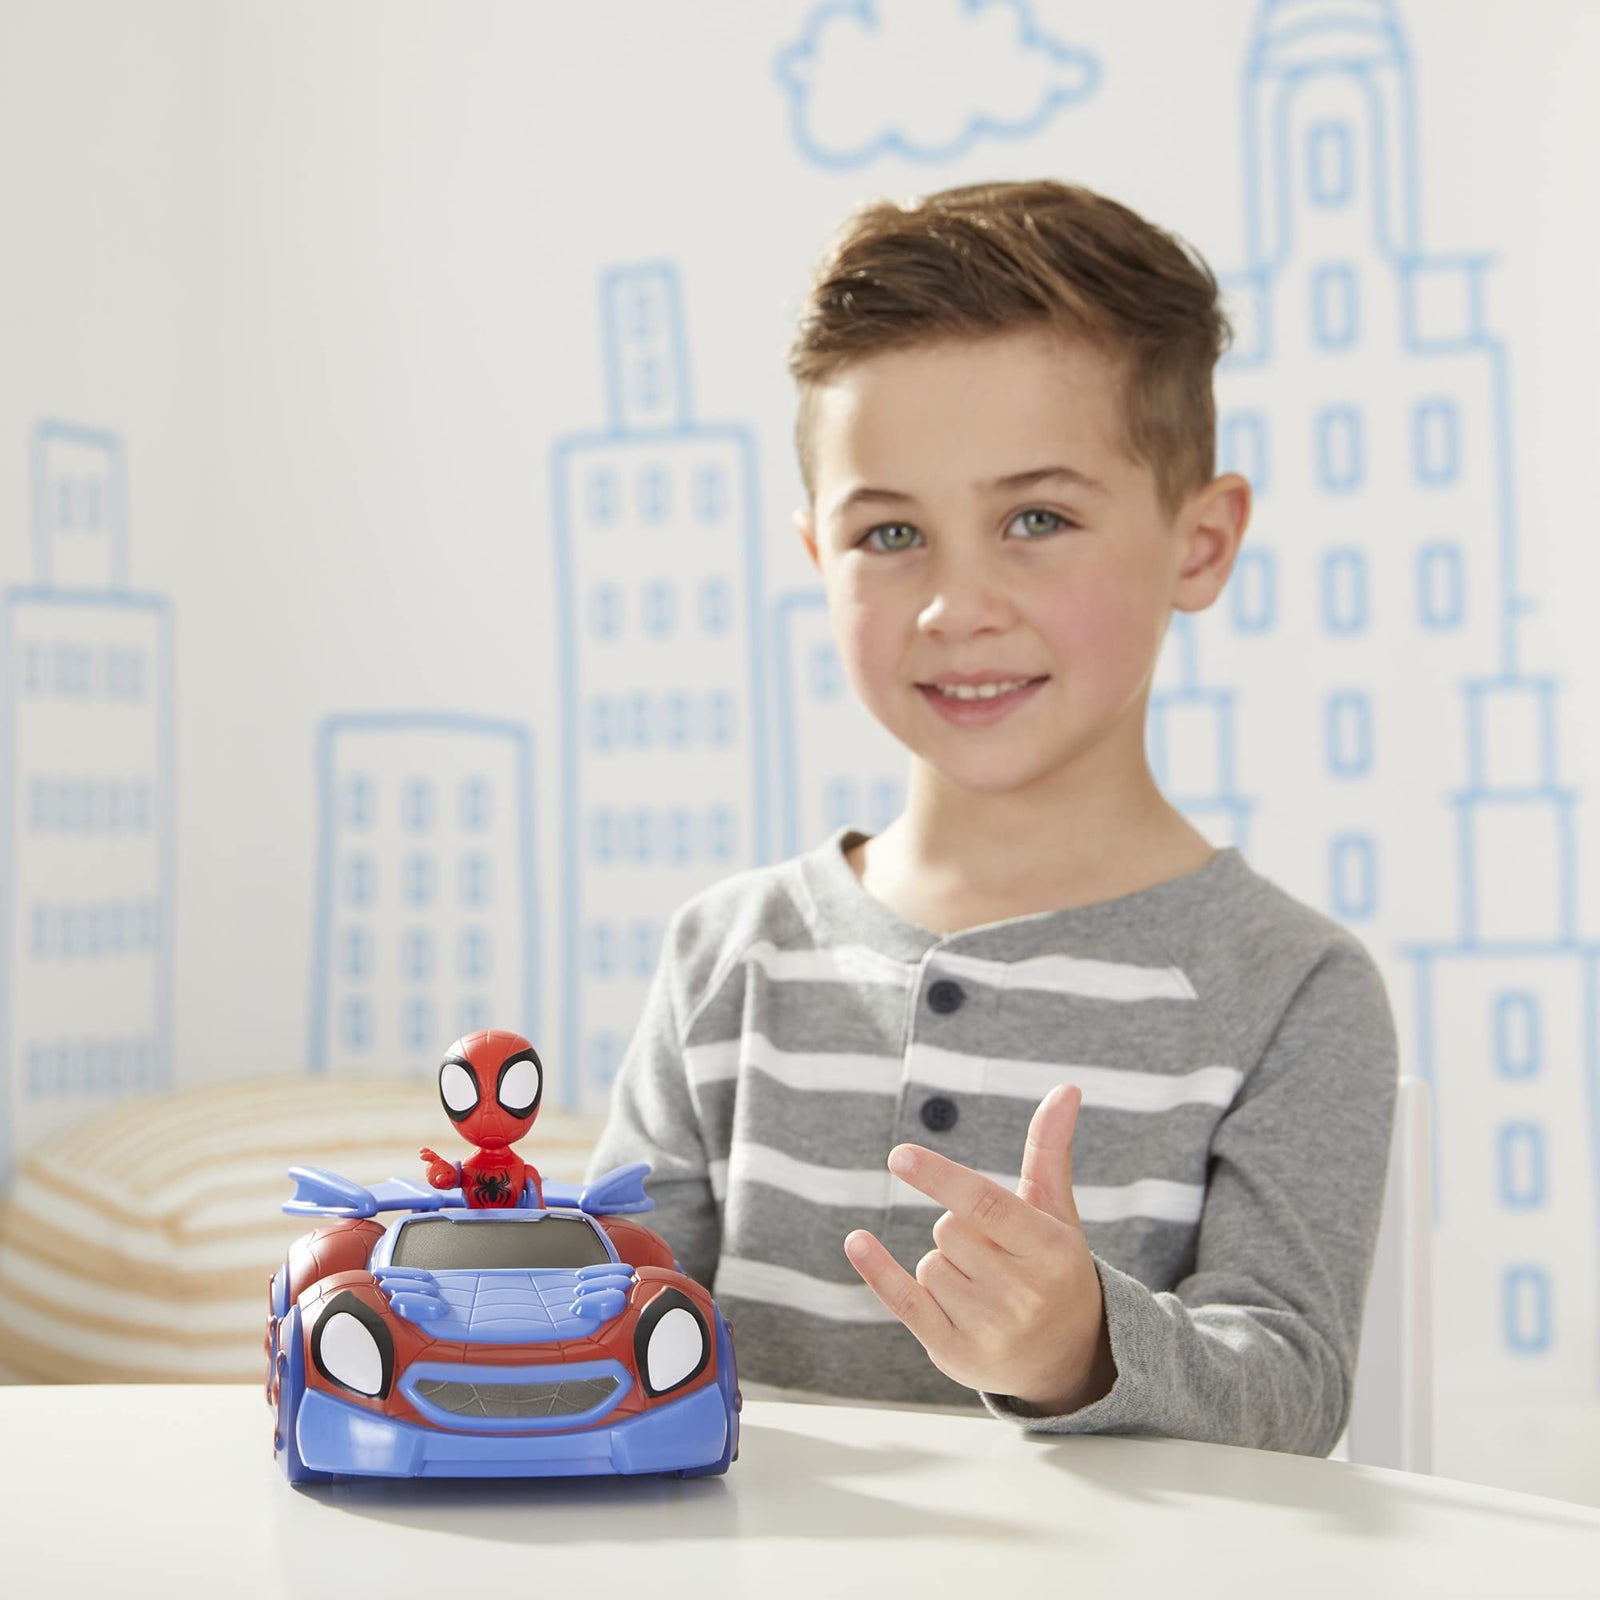 Marvel Spidey and His Amazing Friends Change 'N Go Web-Crawler and Spidey Action Figure, 2 in 1 Vehicle, 4-Inch Figure, for Kids Ages 3 and Up, Frustration Free Packaging